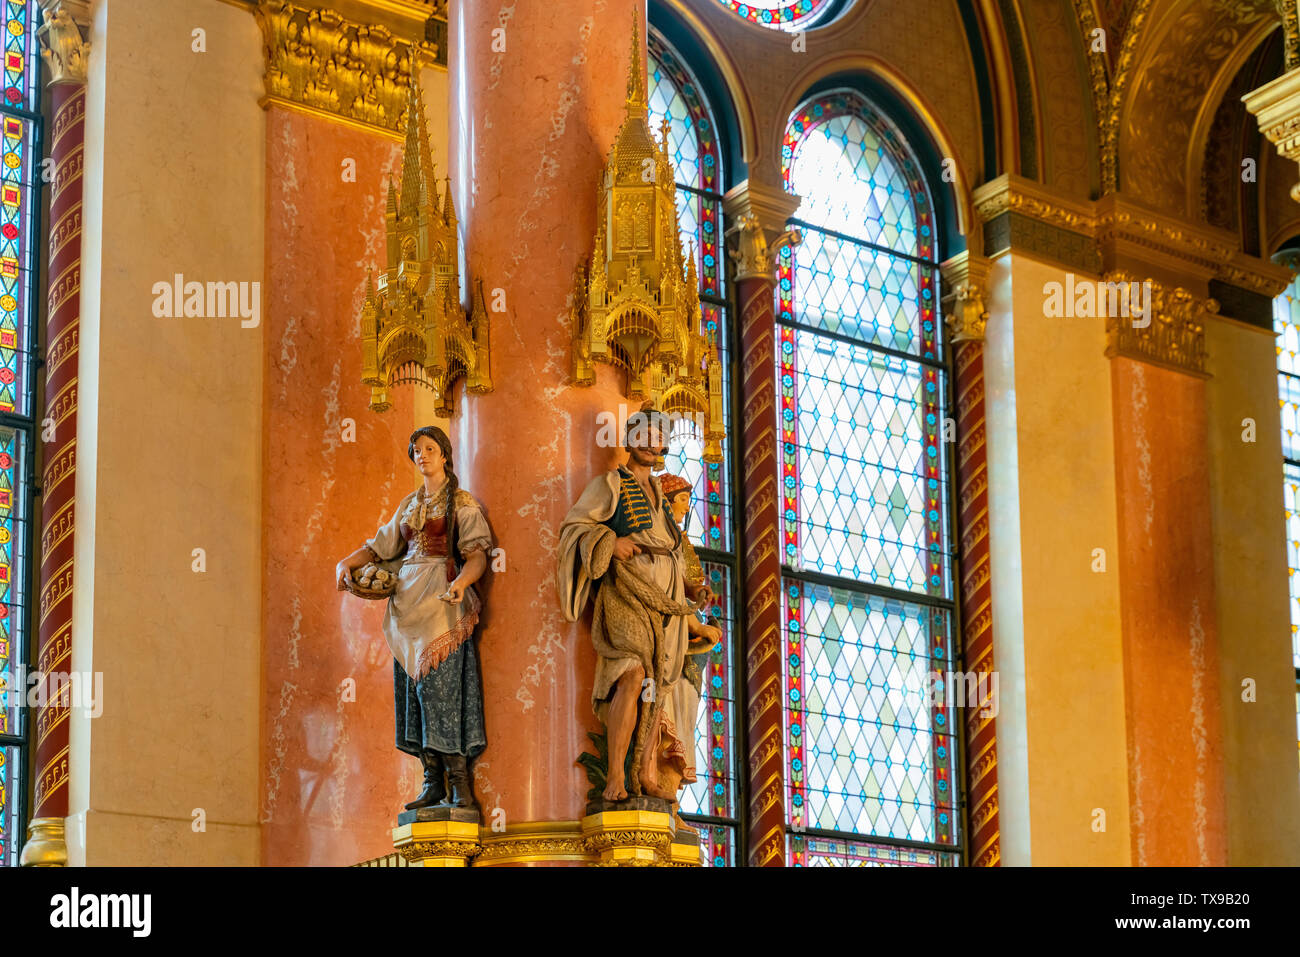 Budapest, NOV 9: Interior view of the Hungarian Parliament Building on NOV 9, 2018 at Budapest, Hungary Stock Photo